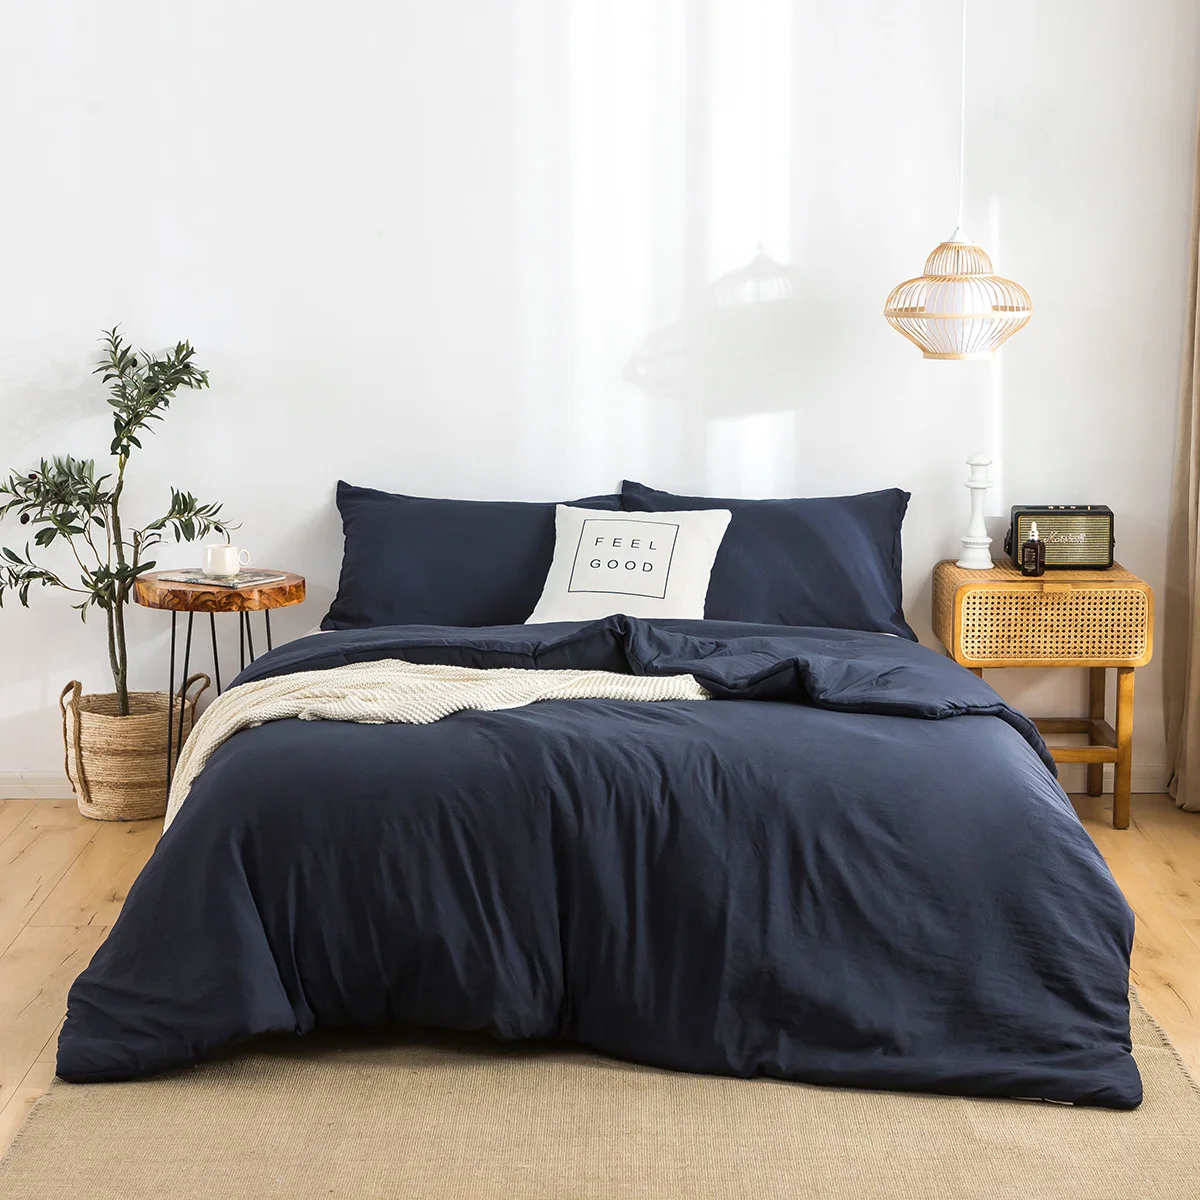 

Ultra-Soft Washed Bedding Comforter Twin Sets All Seasons Light Weight Cotton Fabric Dark Navy Blue with Pillow Sham